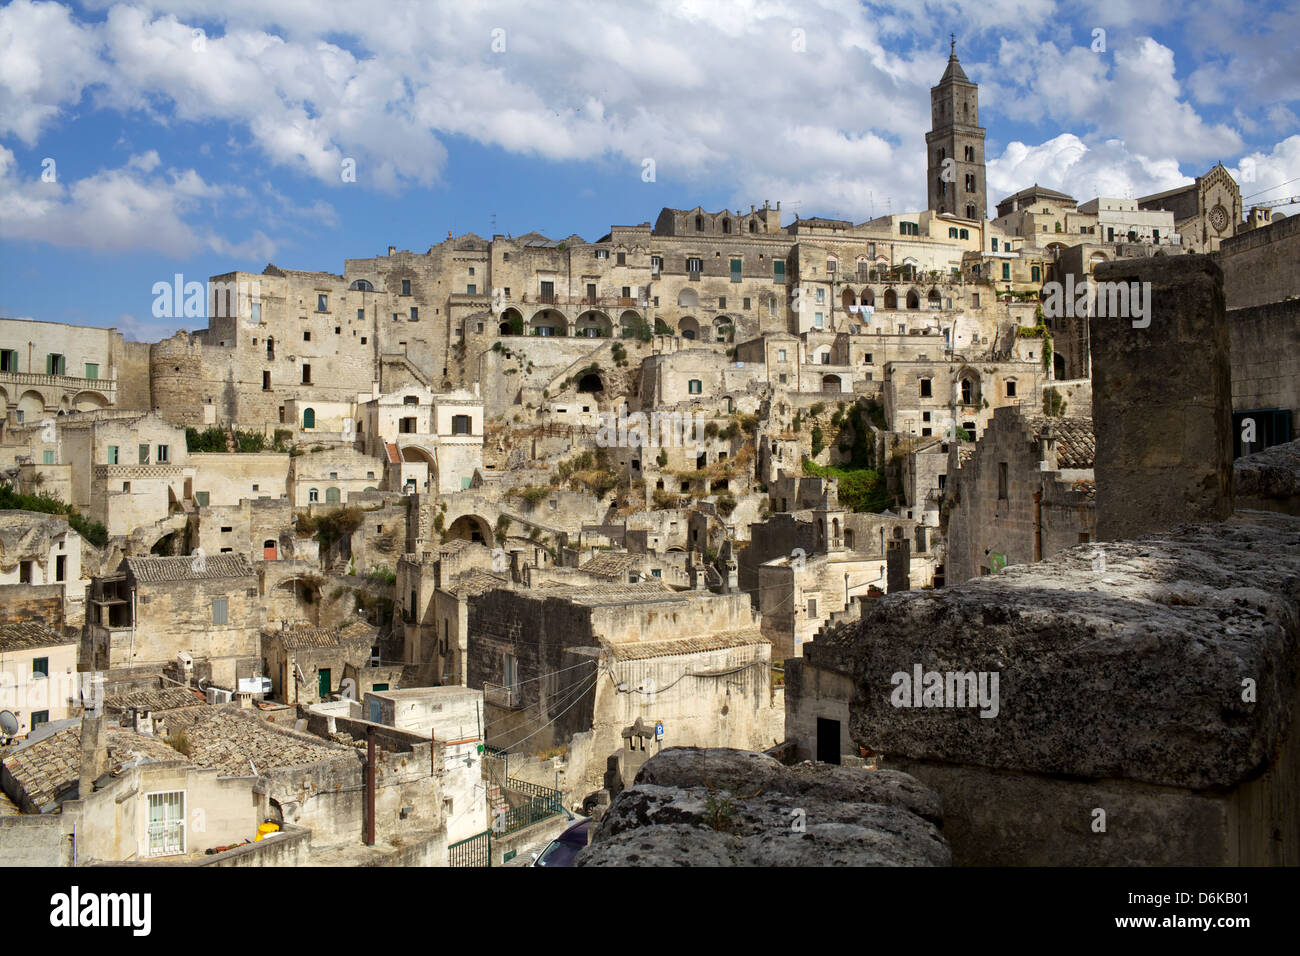 View of the Duomo and the Sassi of Matera, from the cliffside, Basilicata, Italy, Europe Stock Photo